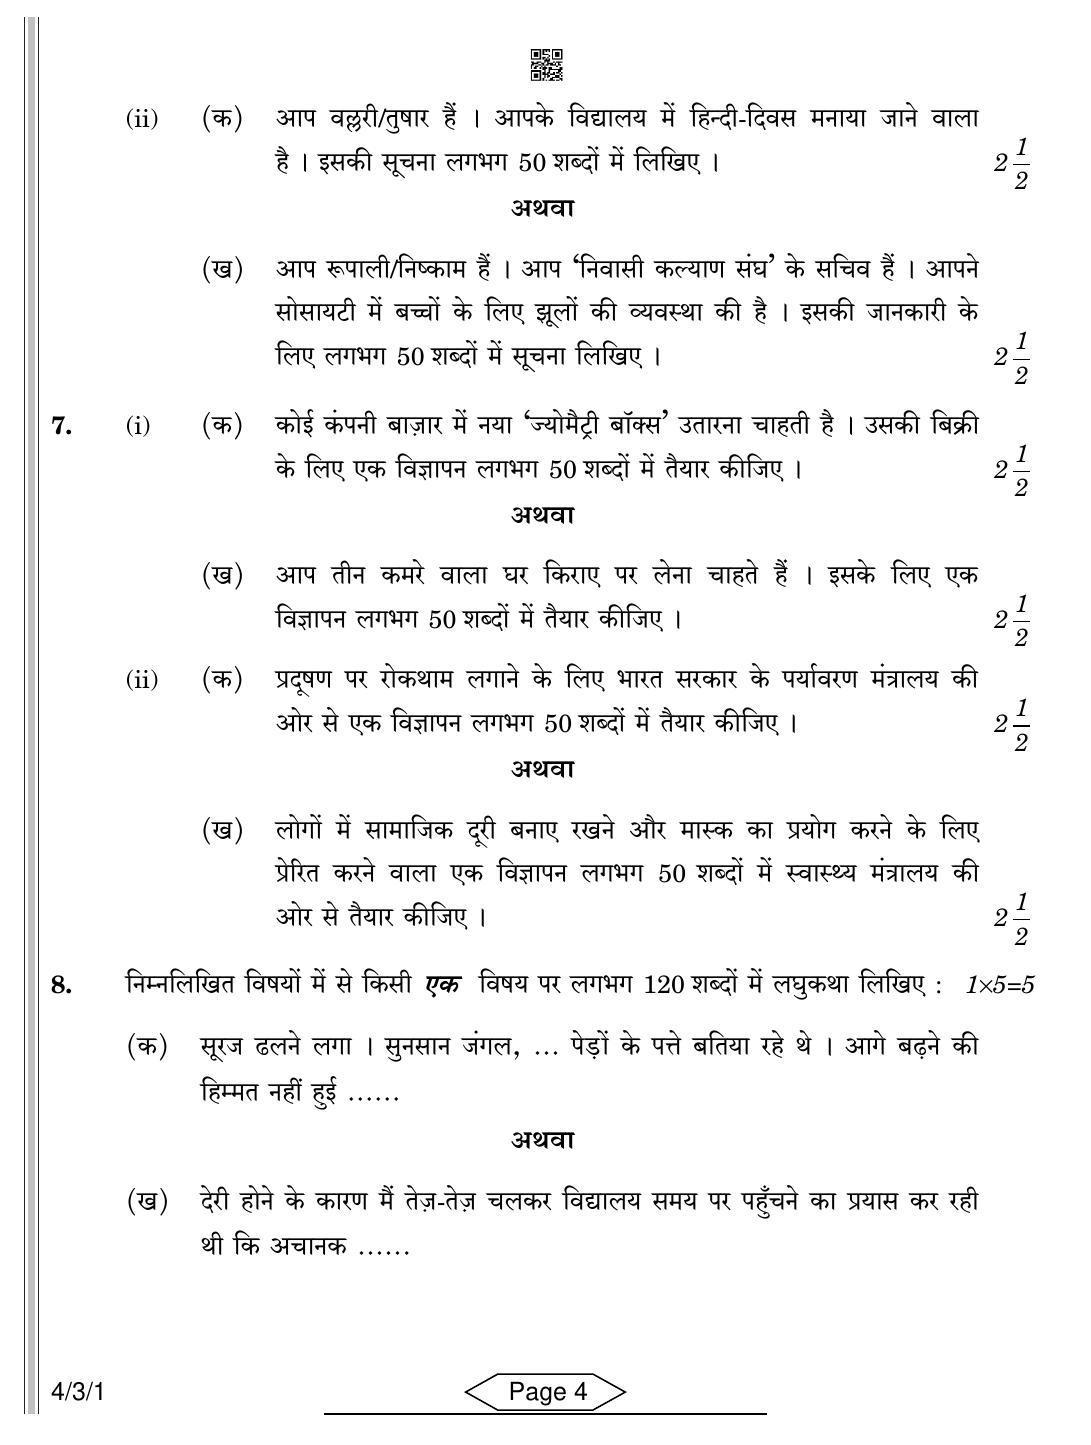 CBSE Class 10 4-3-1 Hindi B 2022 Question Paper - Page 4